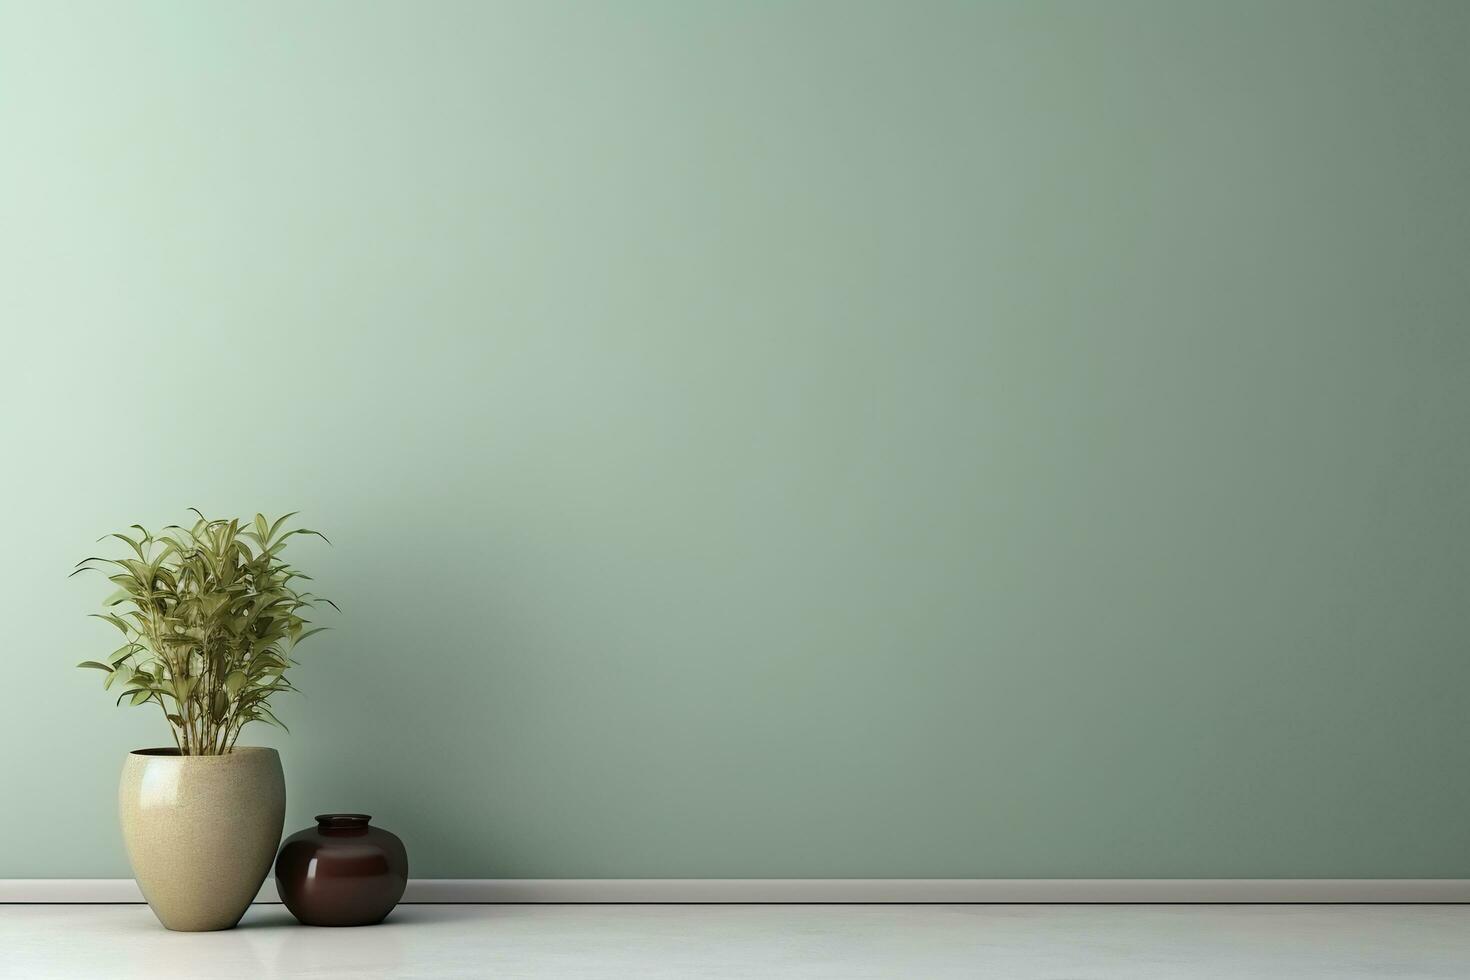 Empty room interior background sage green wall 27822497 Stock Photo at ...